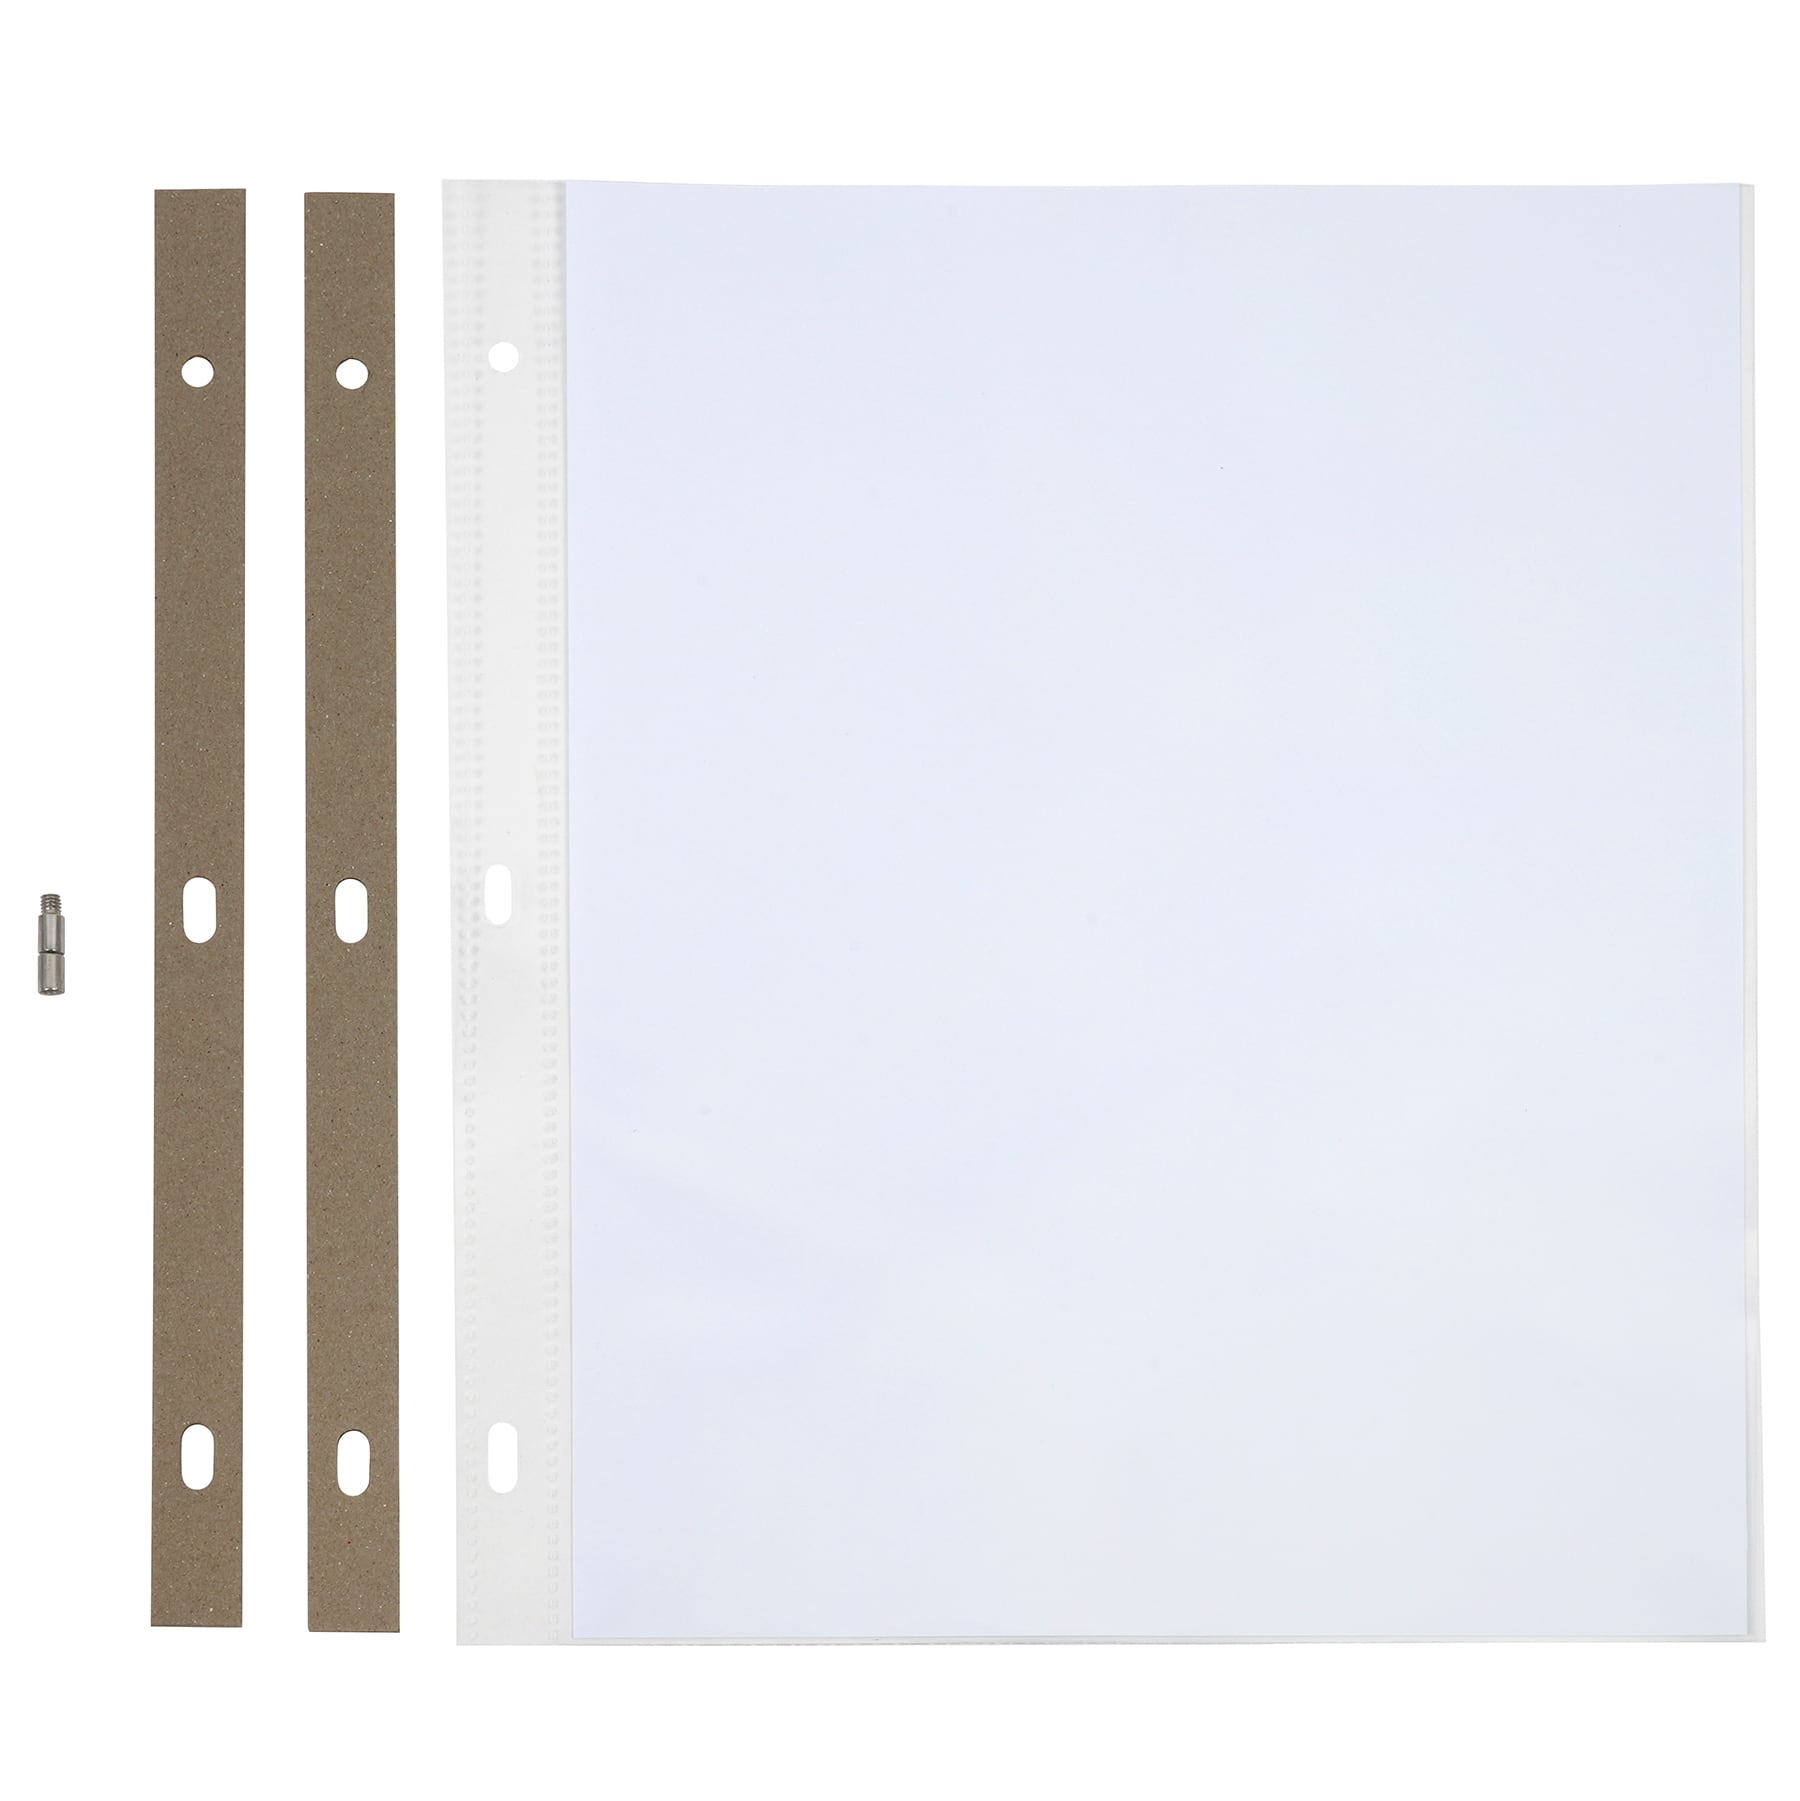 12 Packs: 10 ct. (120 total) 8.5&#x22; x 11&#x22; White Scrapbook Refill Pages by Recollections&#x2122;